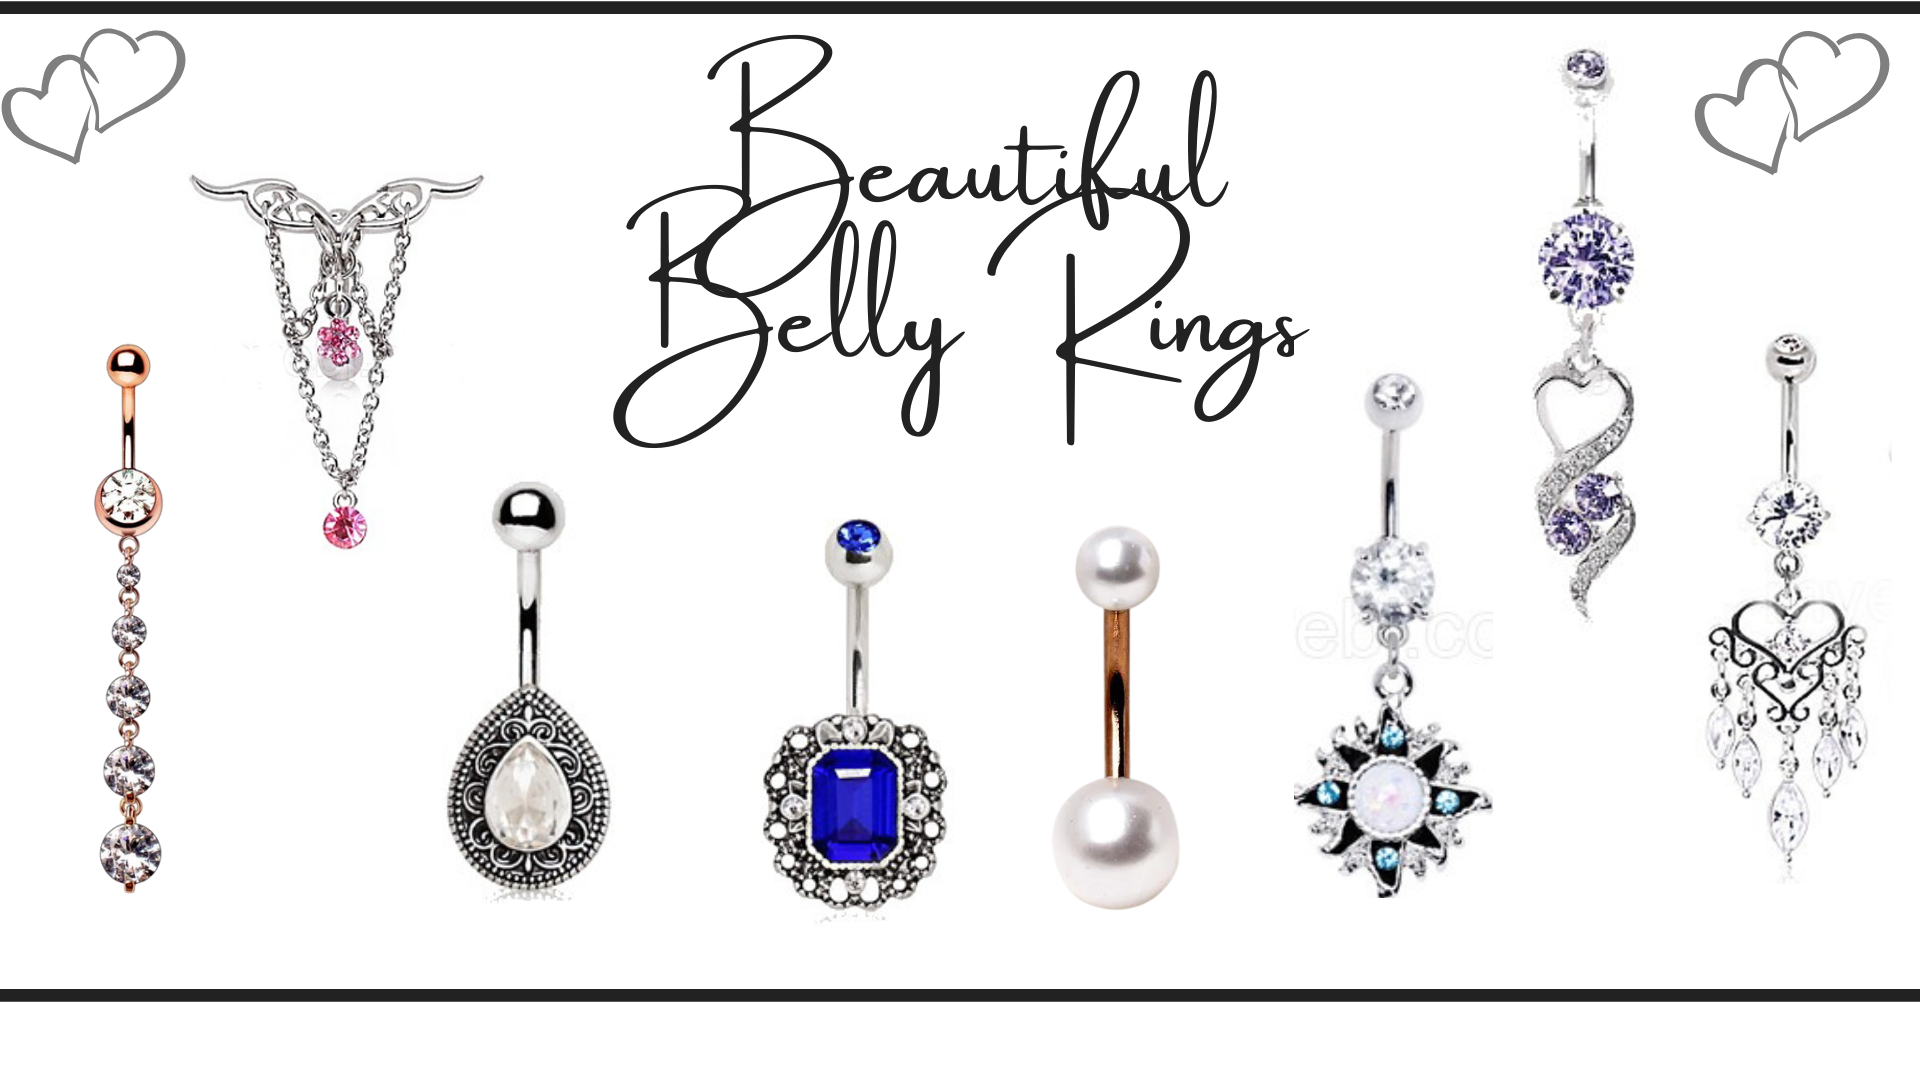 Beautiful Belly Rings, Belly Button Rings & Navel Rings. Top Down and Dangle styles just to name a few and all on Sale. - Fashion Hut Jewelry